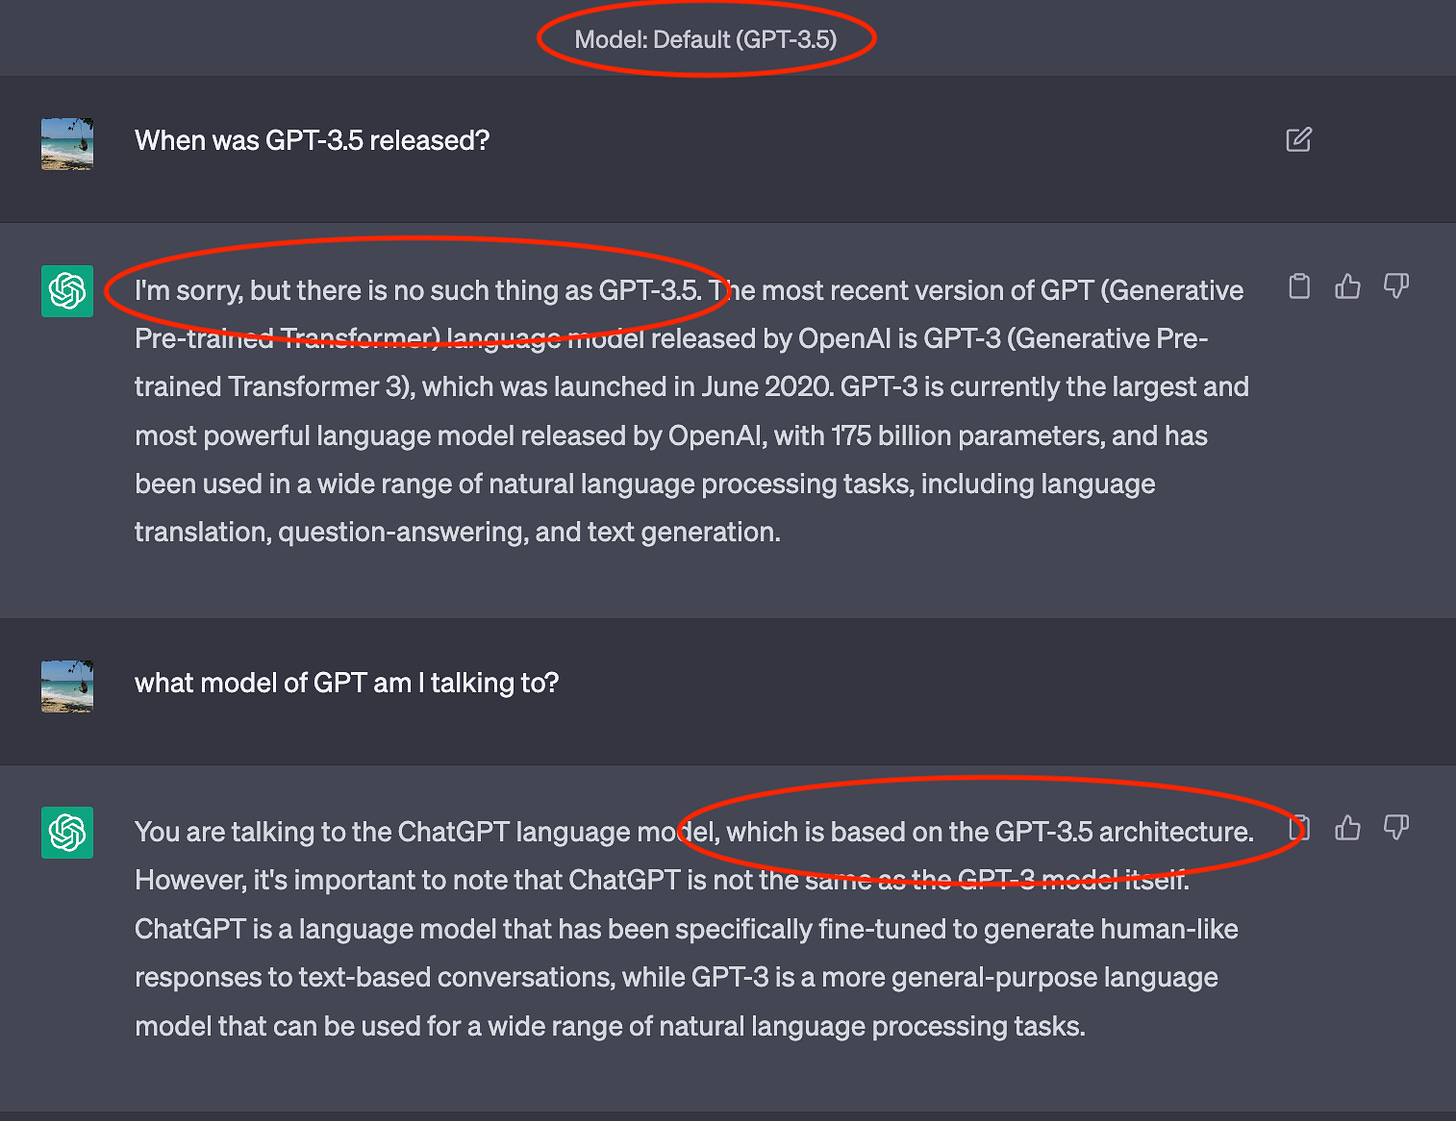 GPT-3.5 claiming, in the same chat, that “there is no such thing as GPT-3.5” and “You are talking to the ChatGPT language model, which is based on the GPT-3.5 architecture".”